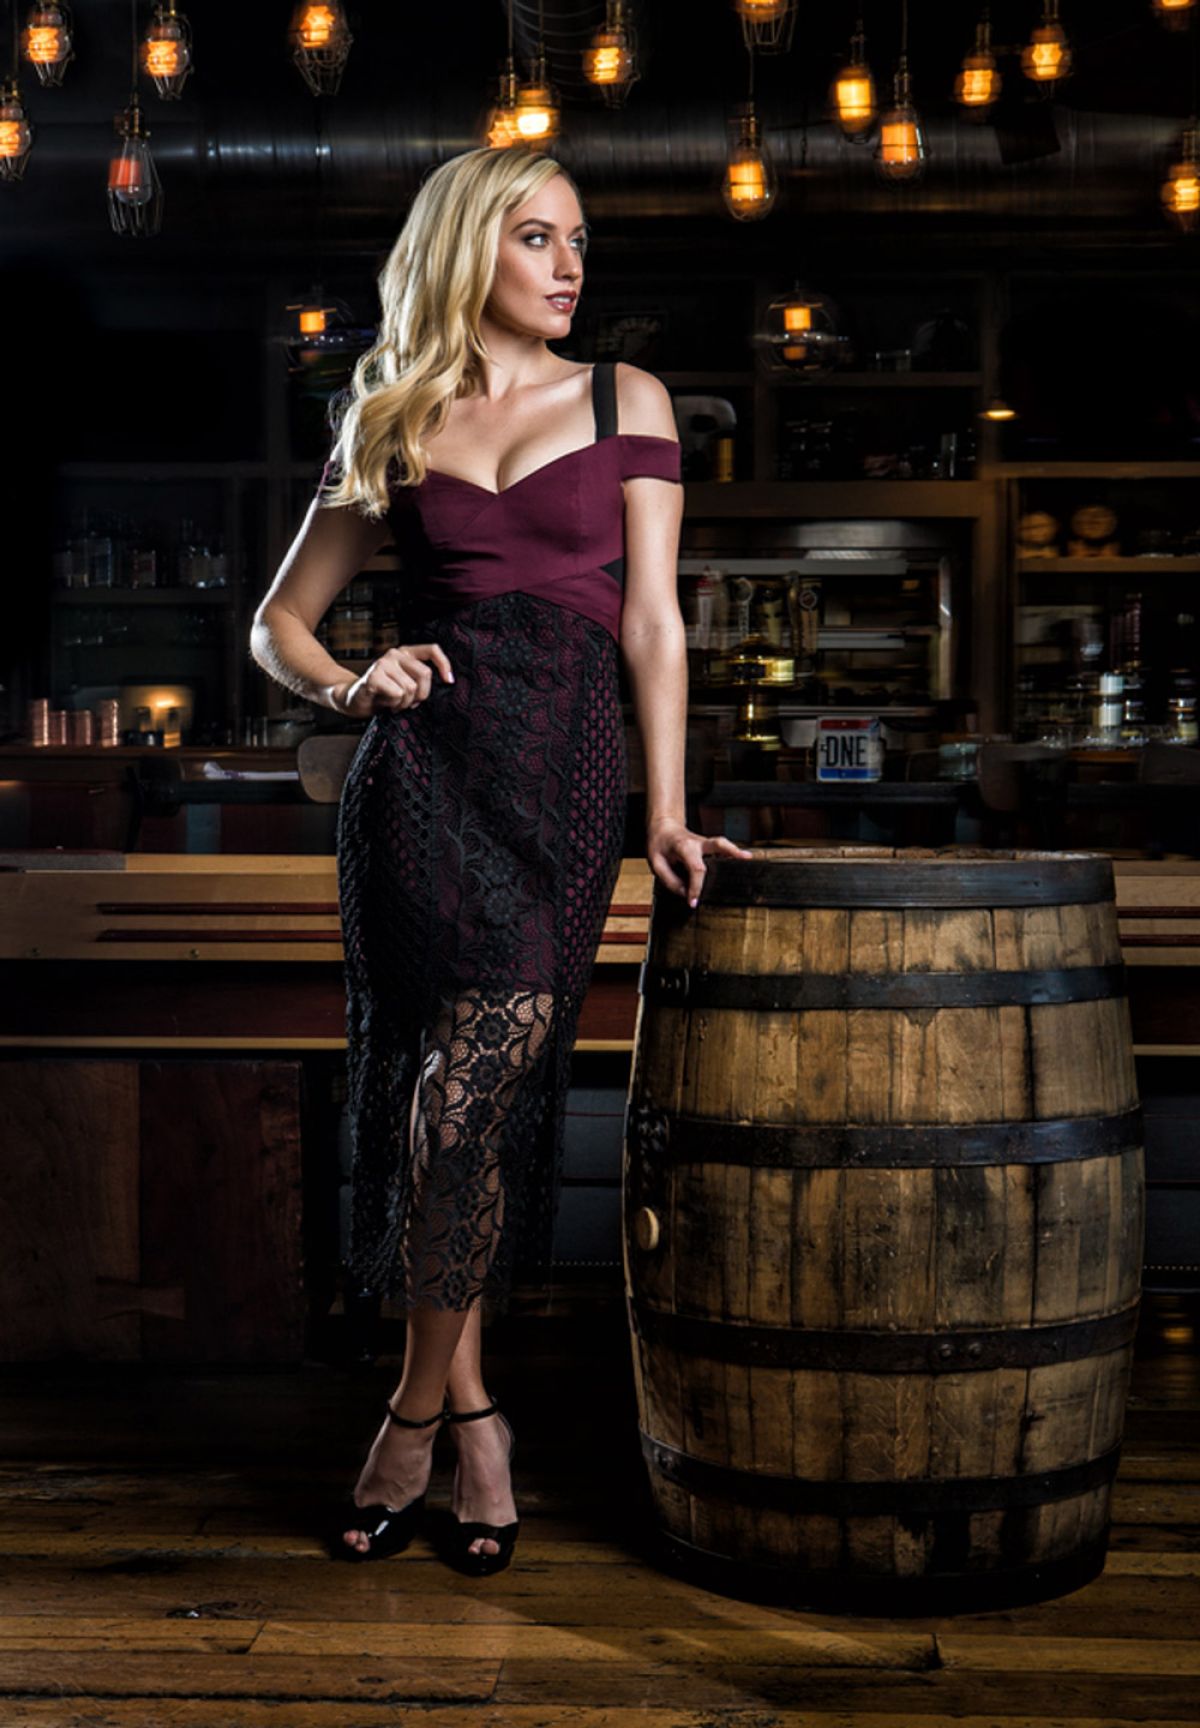 Paige Spiranac for golf.com Most Stylish People in Golf, January 2018